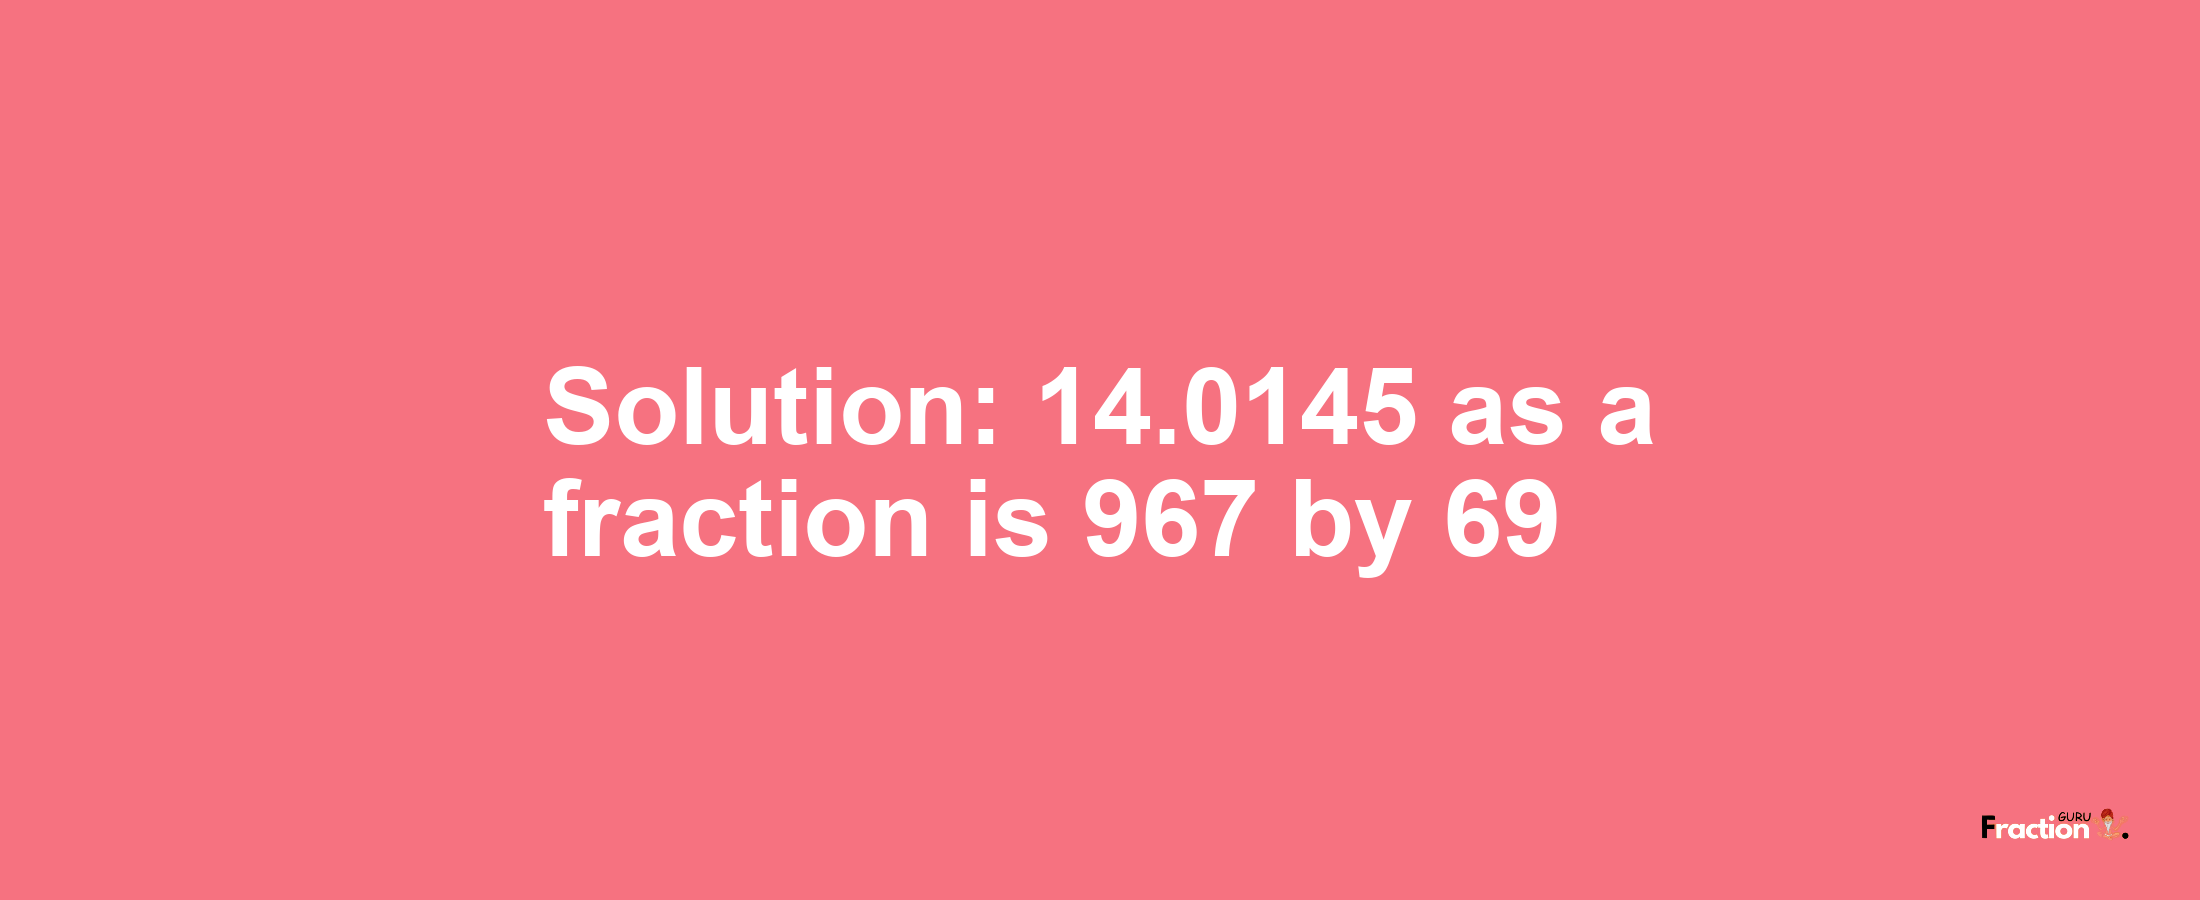 Solution:14.0145 as a fraction is 967/69